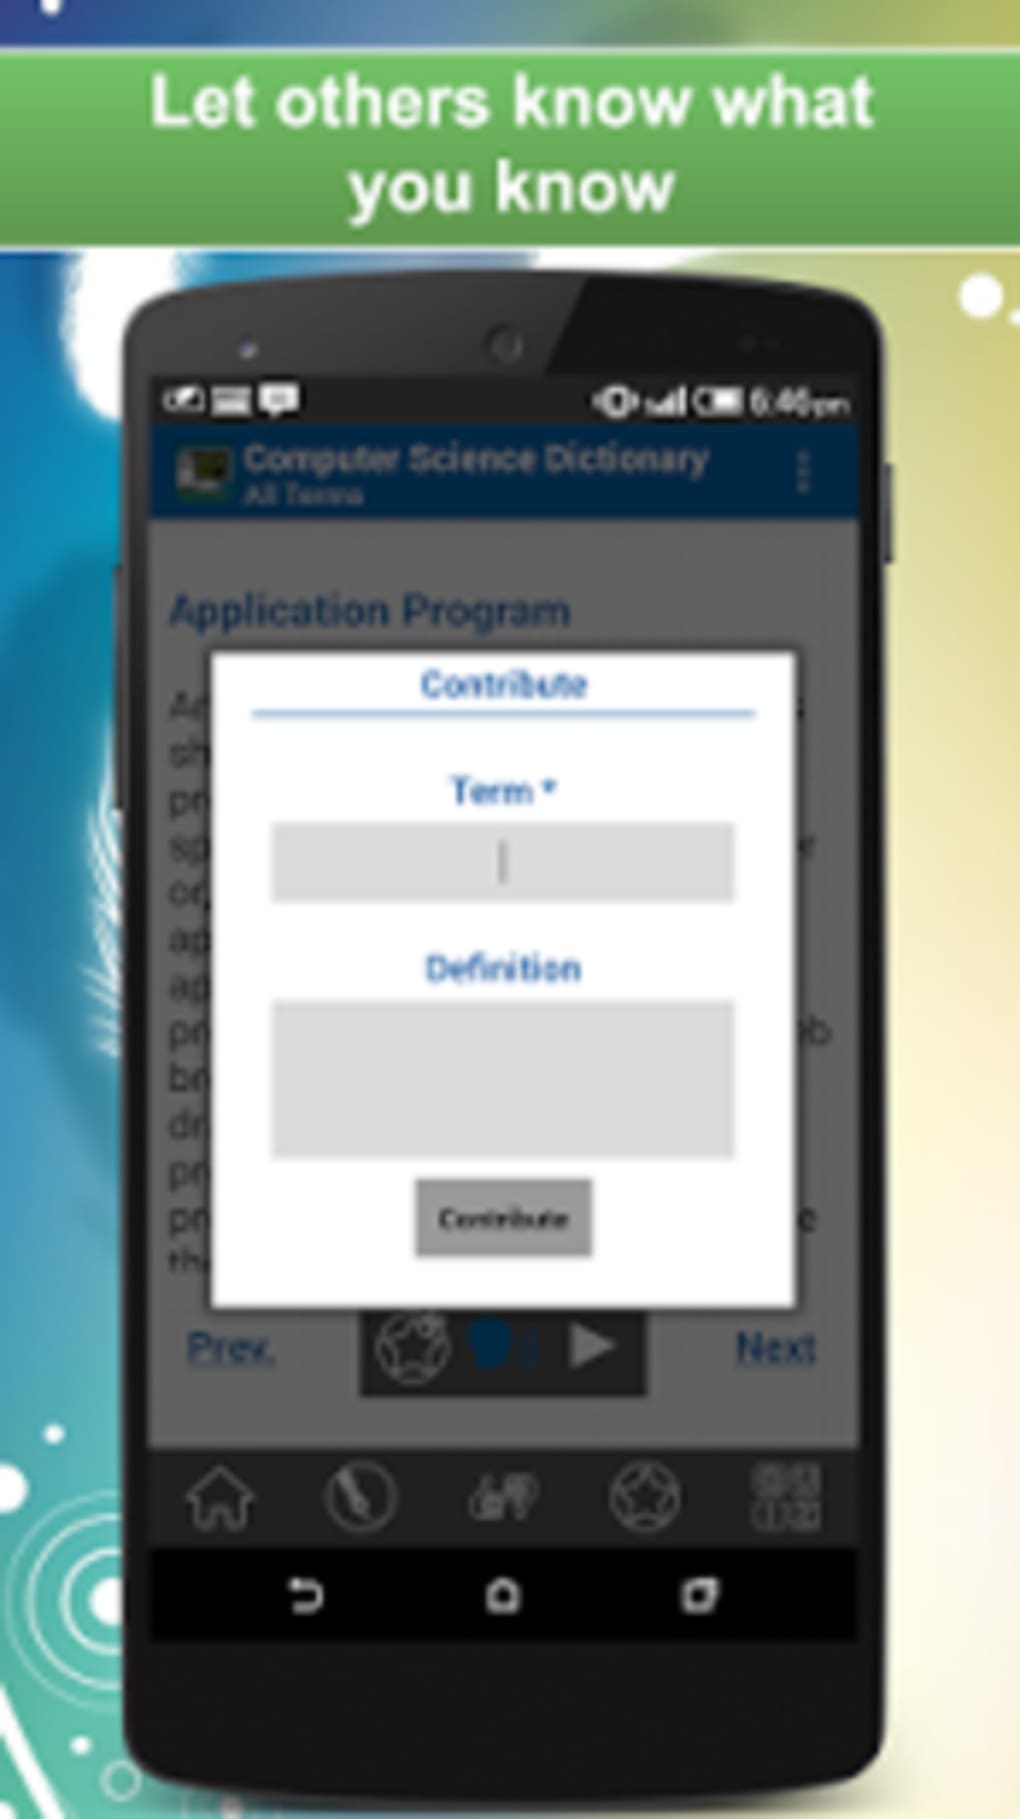 Computer Science Dictionary For Android Download